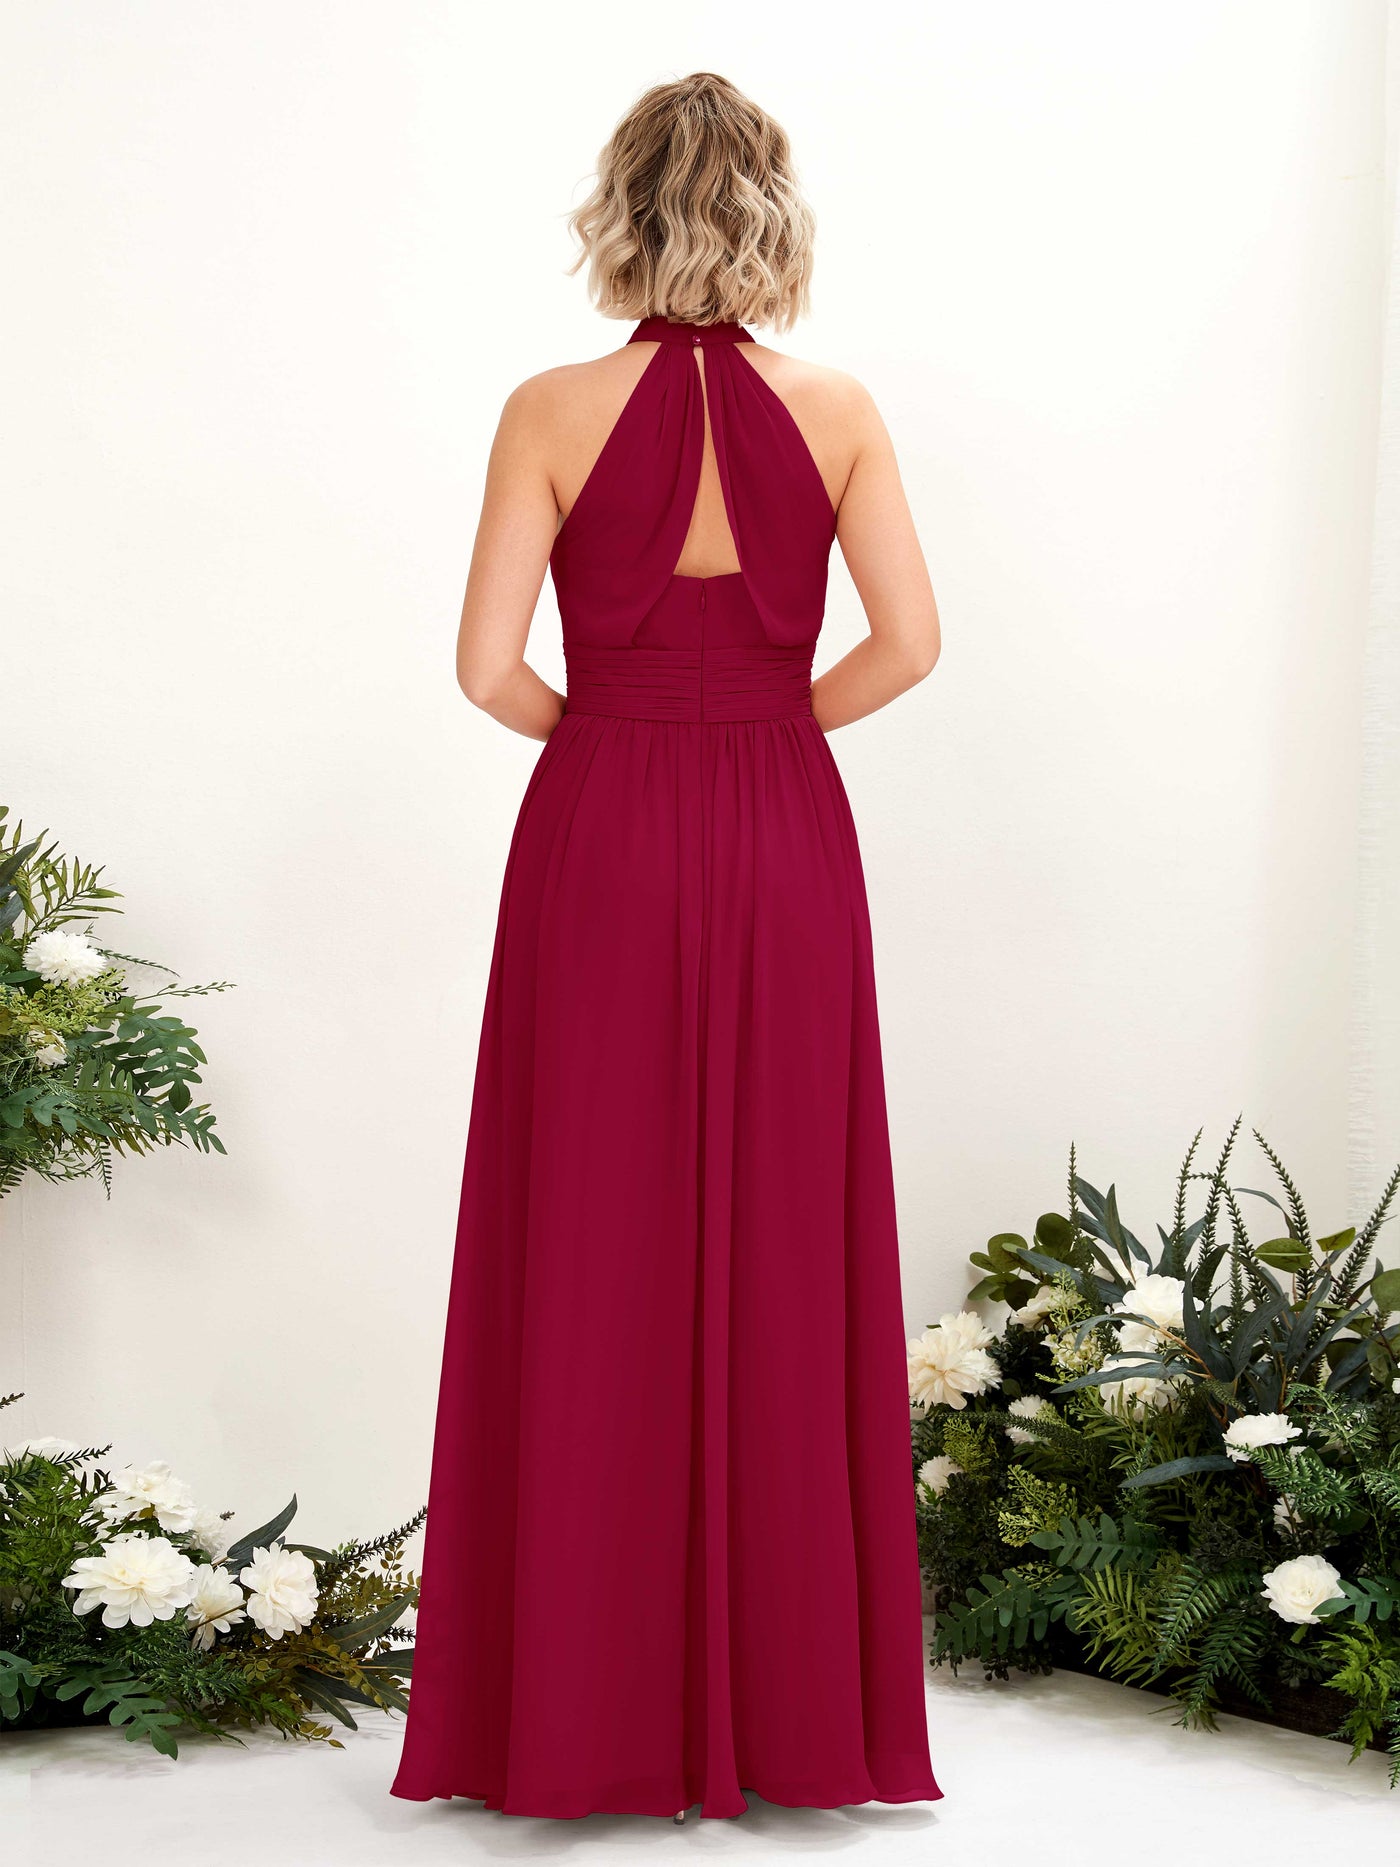 Jester Red Bridesmaid Dresses Bridesmaid Dress A-line Chiffon Halter Full Length Sleeveless Wedding Party Dress (81225341)#color_jester-red